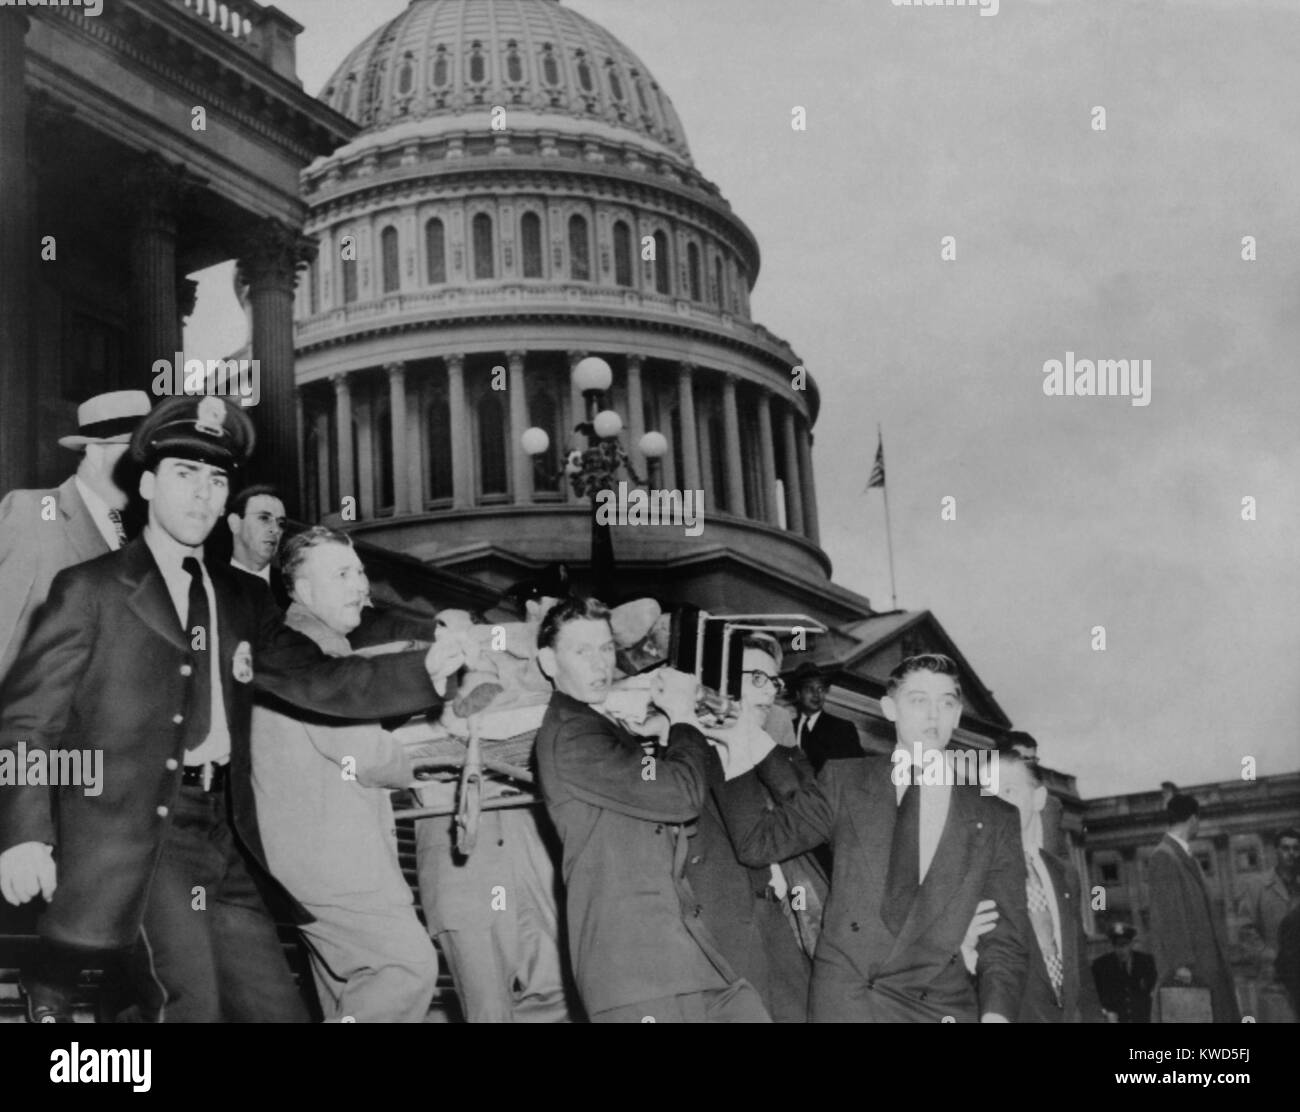 Aftermath of the Puerto Rican terrorist shooting in the U.S. House of Representatives. Police and aids carry Rep. Kenneth Roberts from the House where he suffered leg wound. March 1, 1954. (BSLOC 2014 13 137) Stock Photo